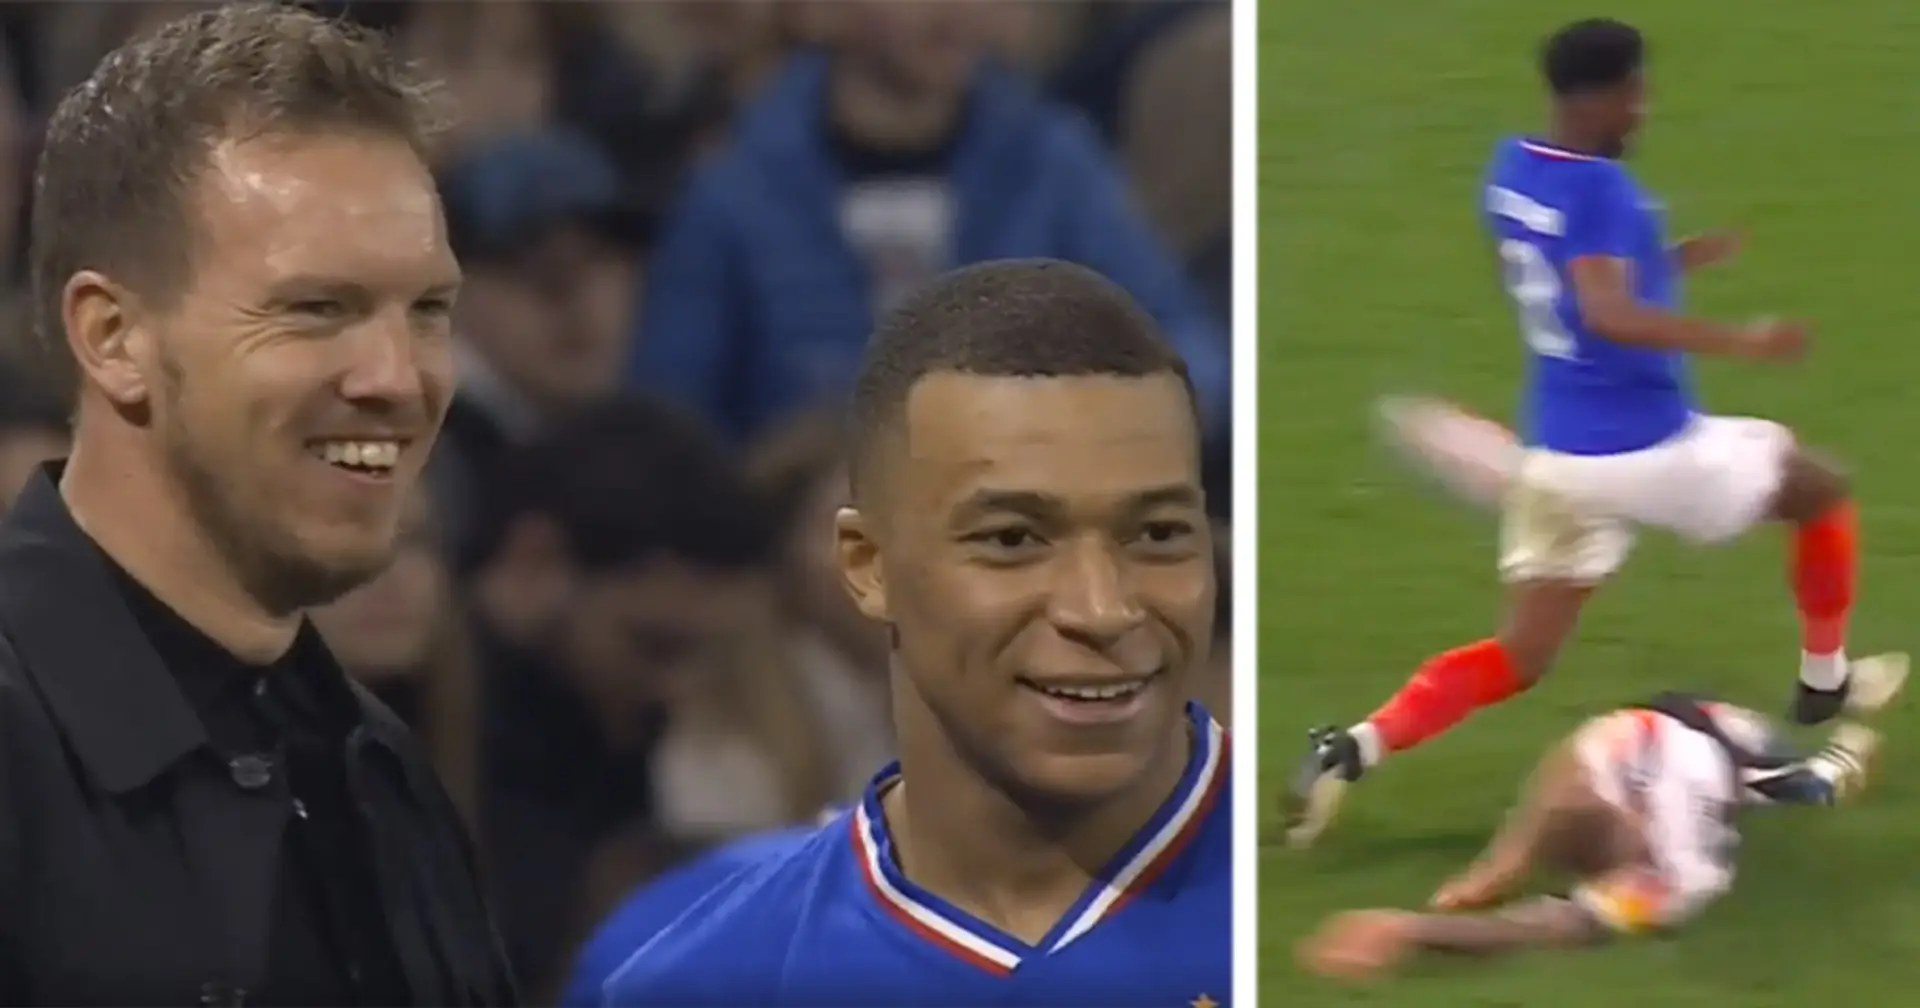 Kroos comes up with BIG tackle on Tchouameni – Mbappe laughs in the background